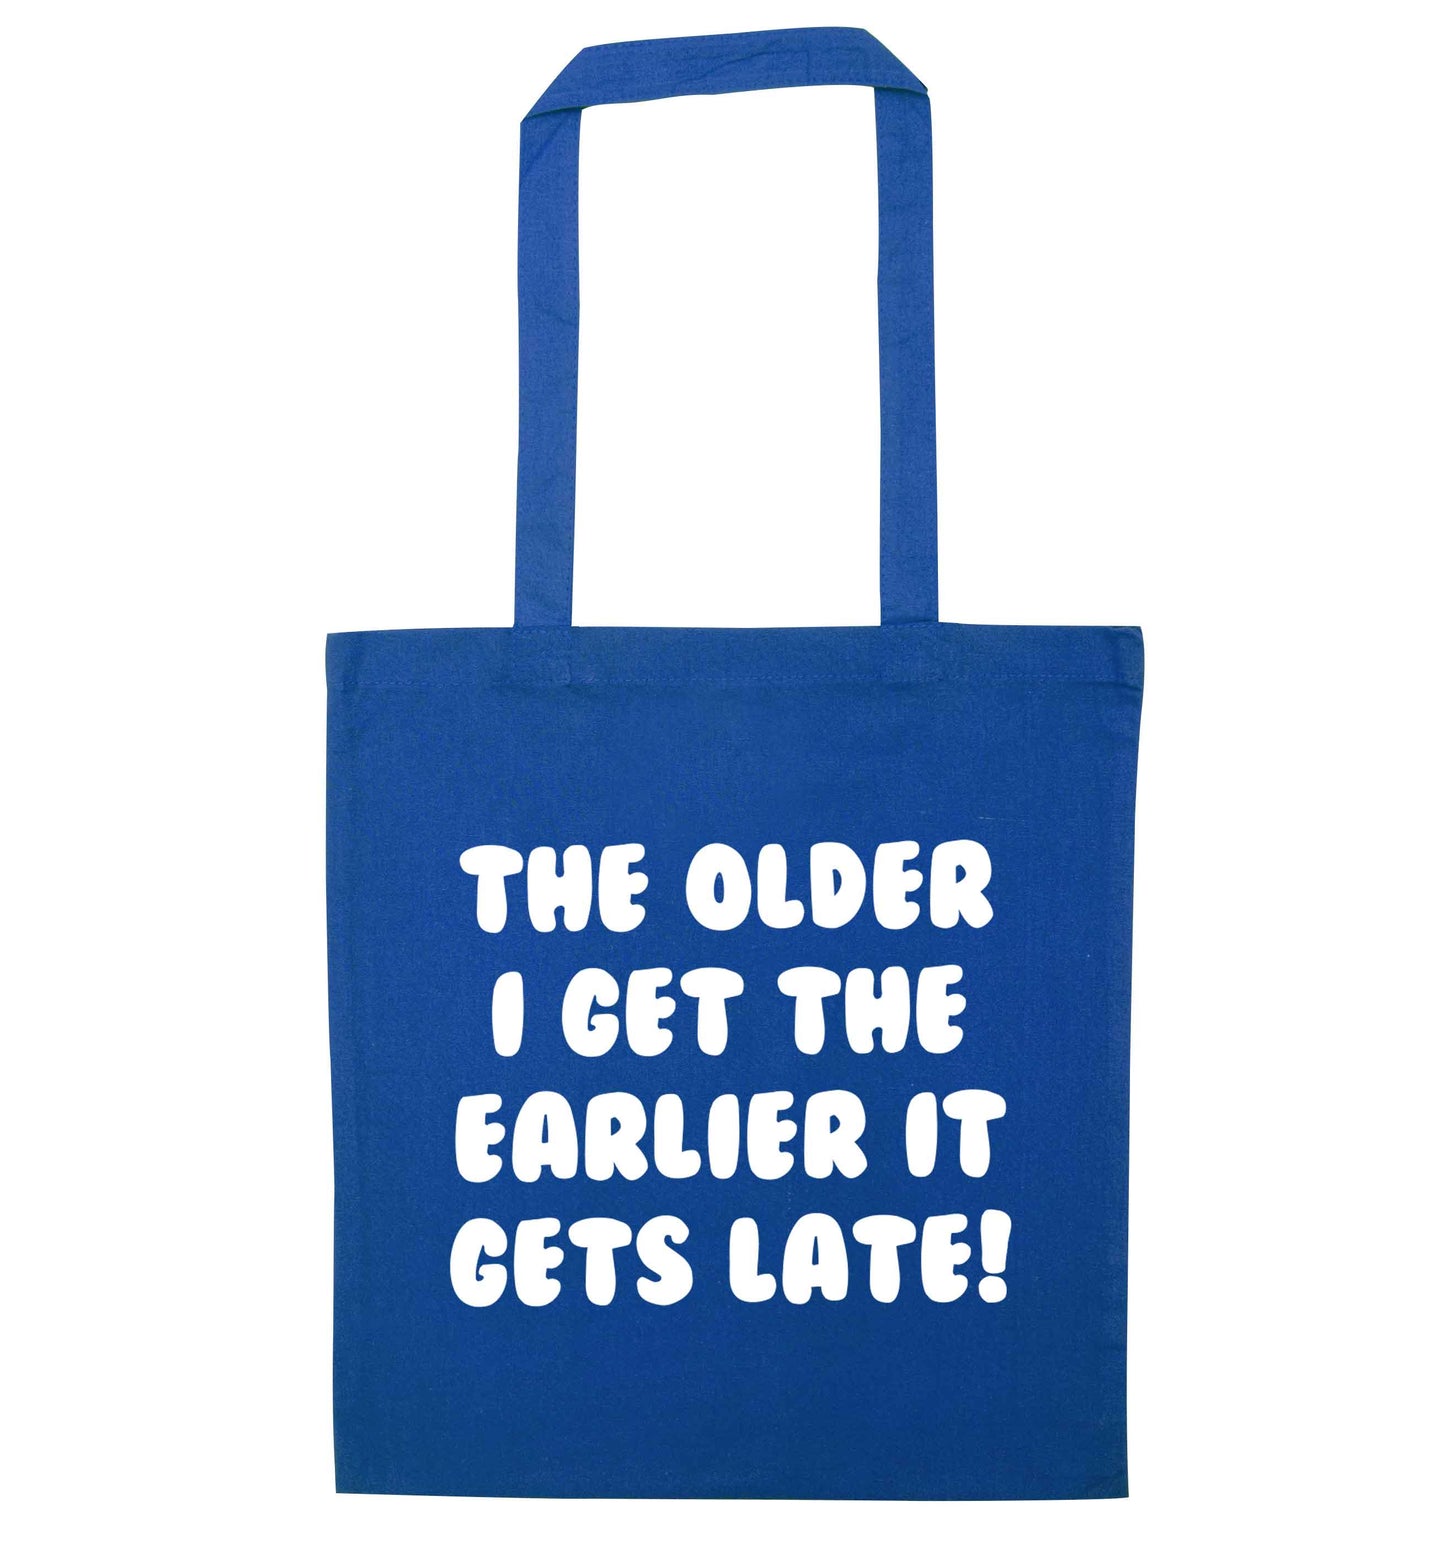 The older I get the earlier it gets late! blue tote bag